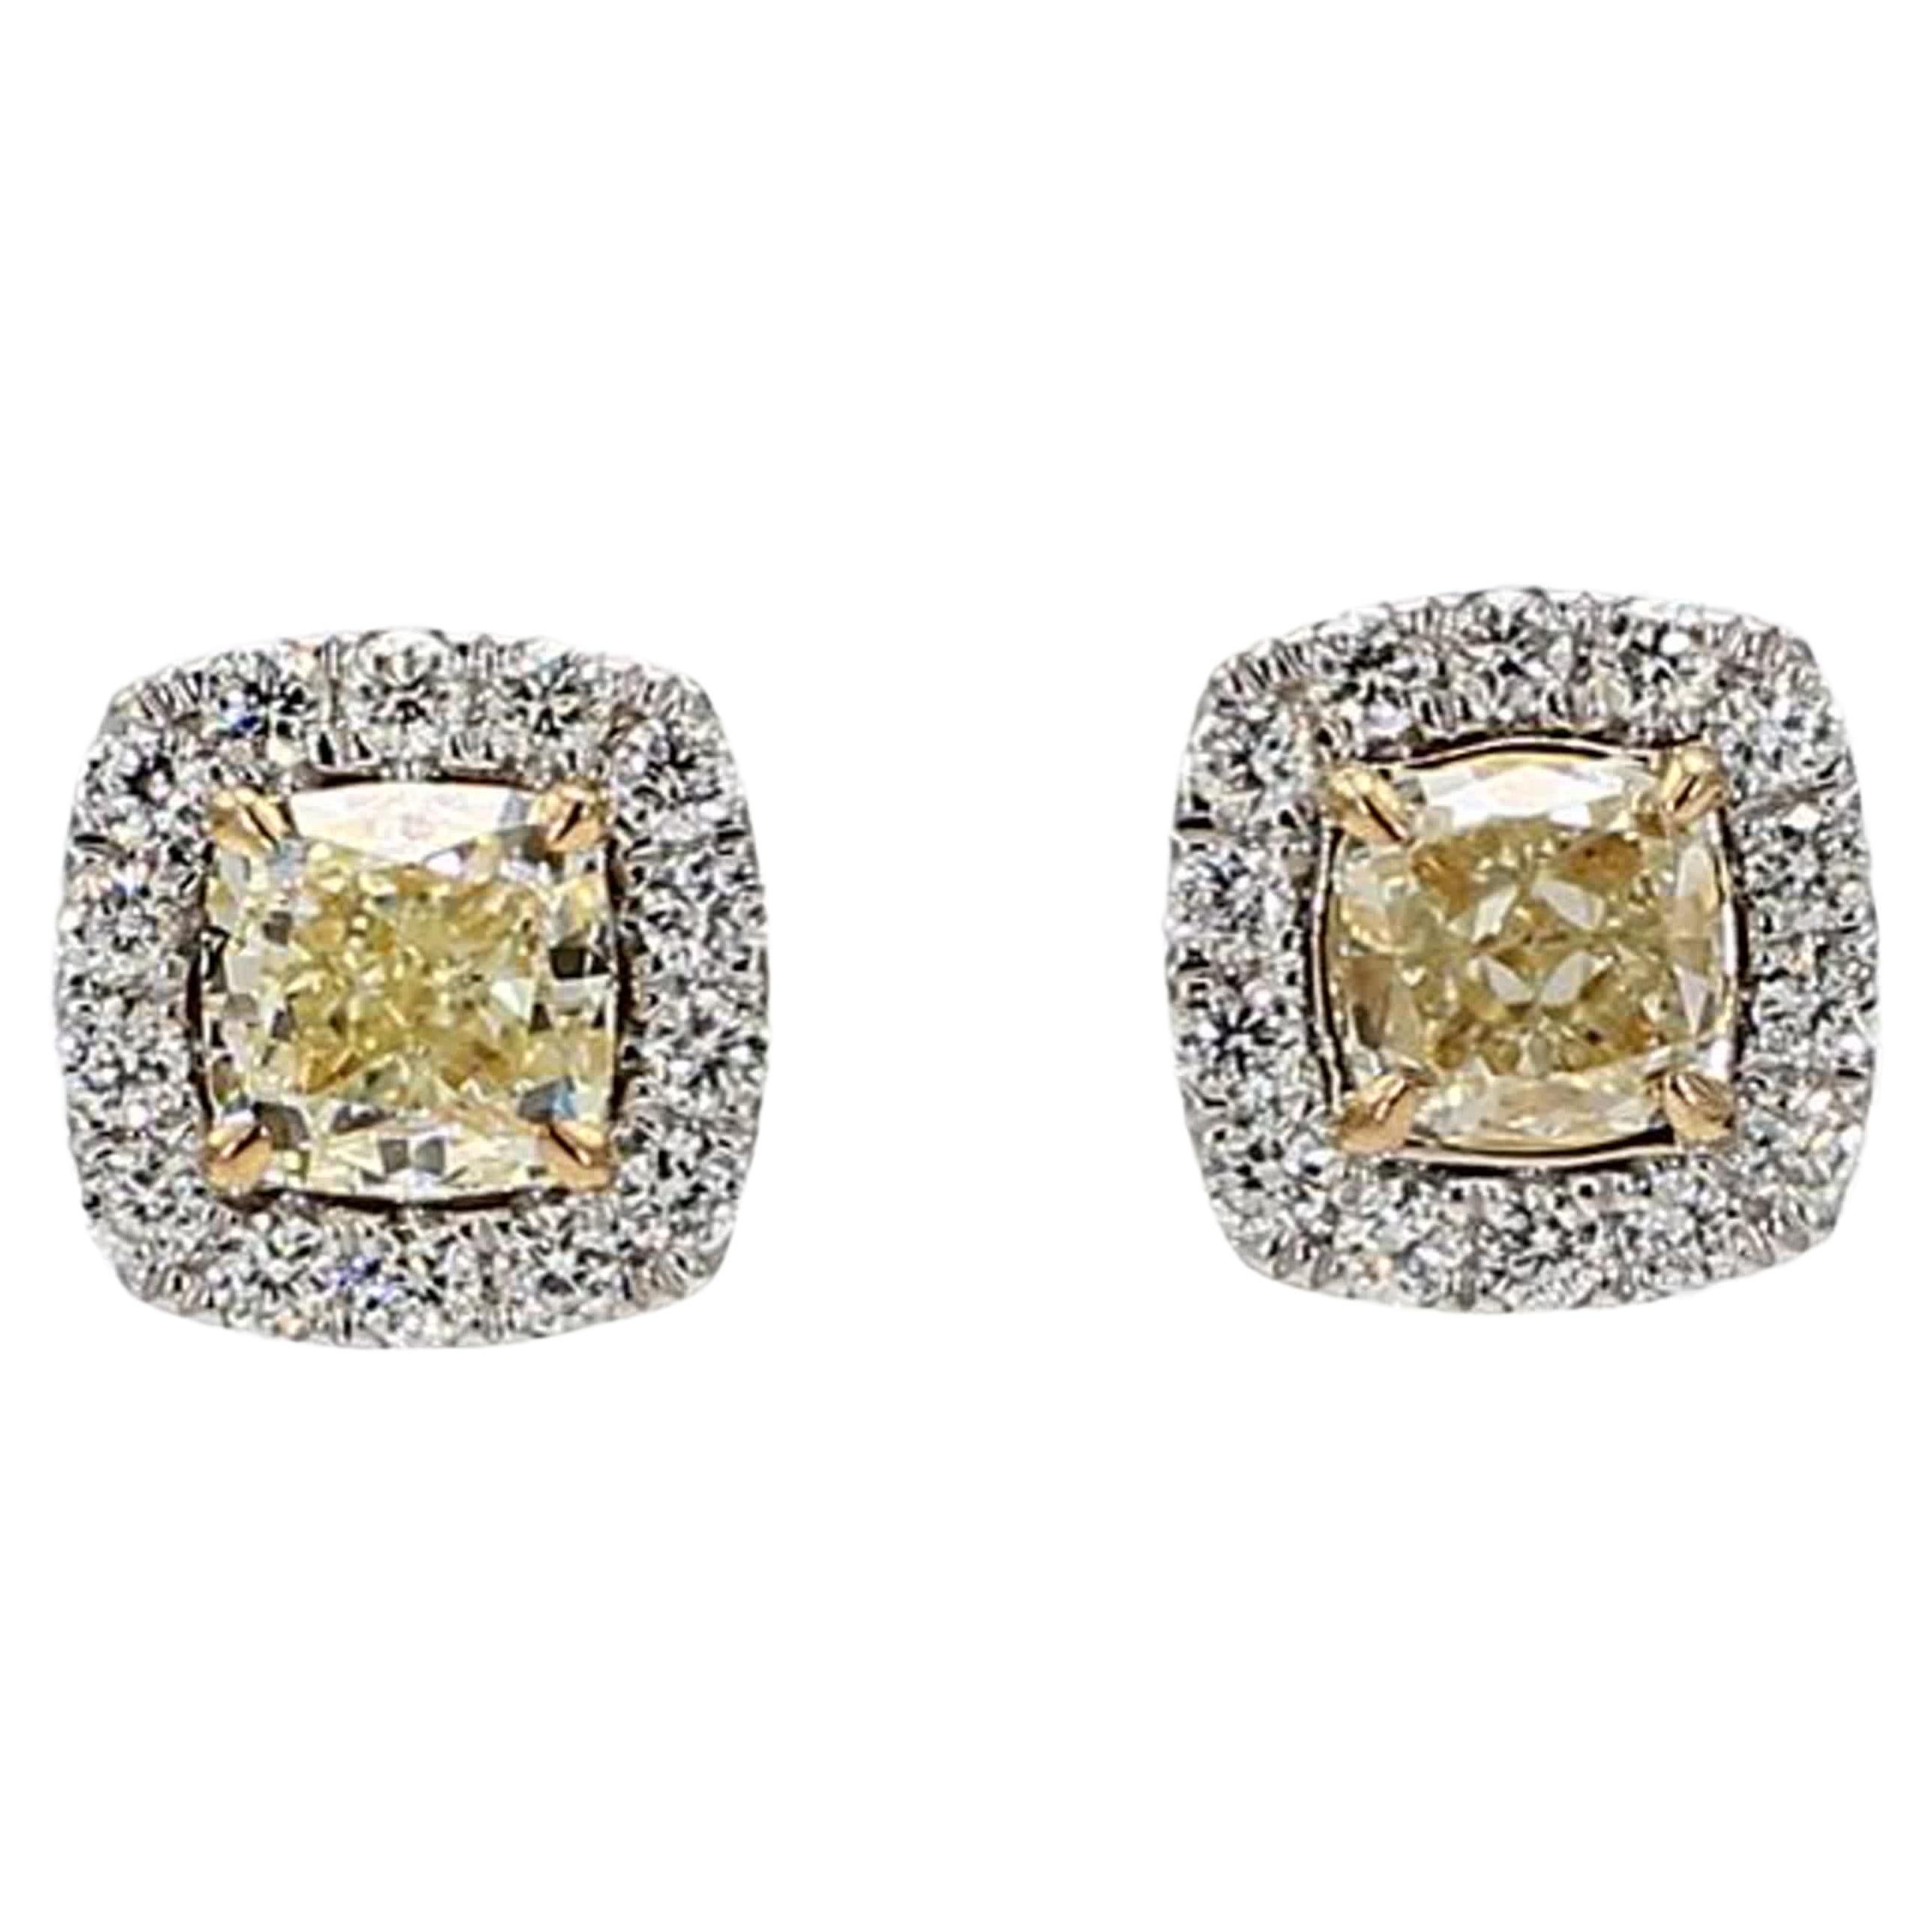 Natural Yellow Cushion and White Diamond 1.25 Carat TW Gold Stud Earrings For Sale